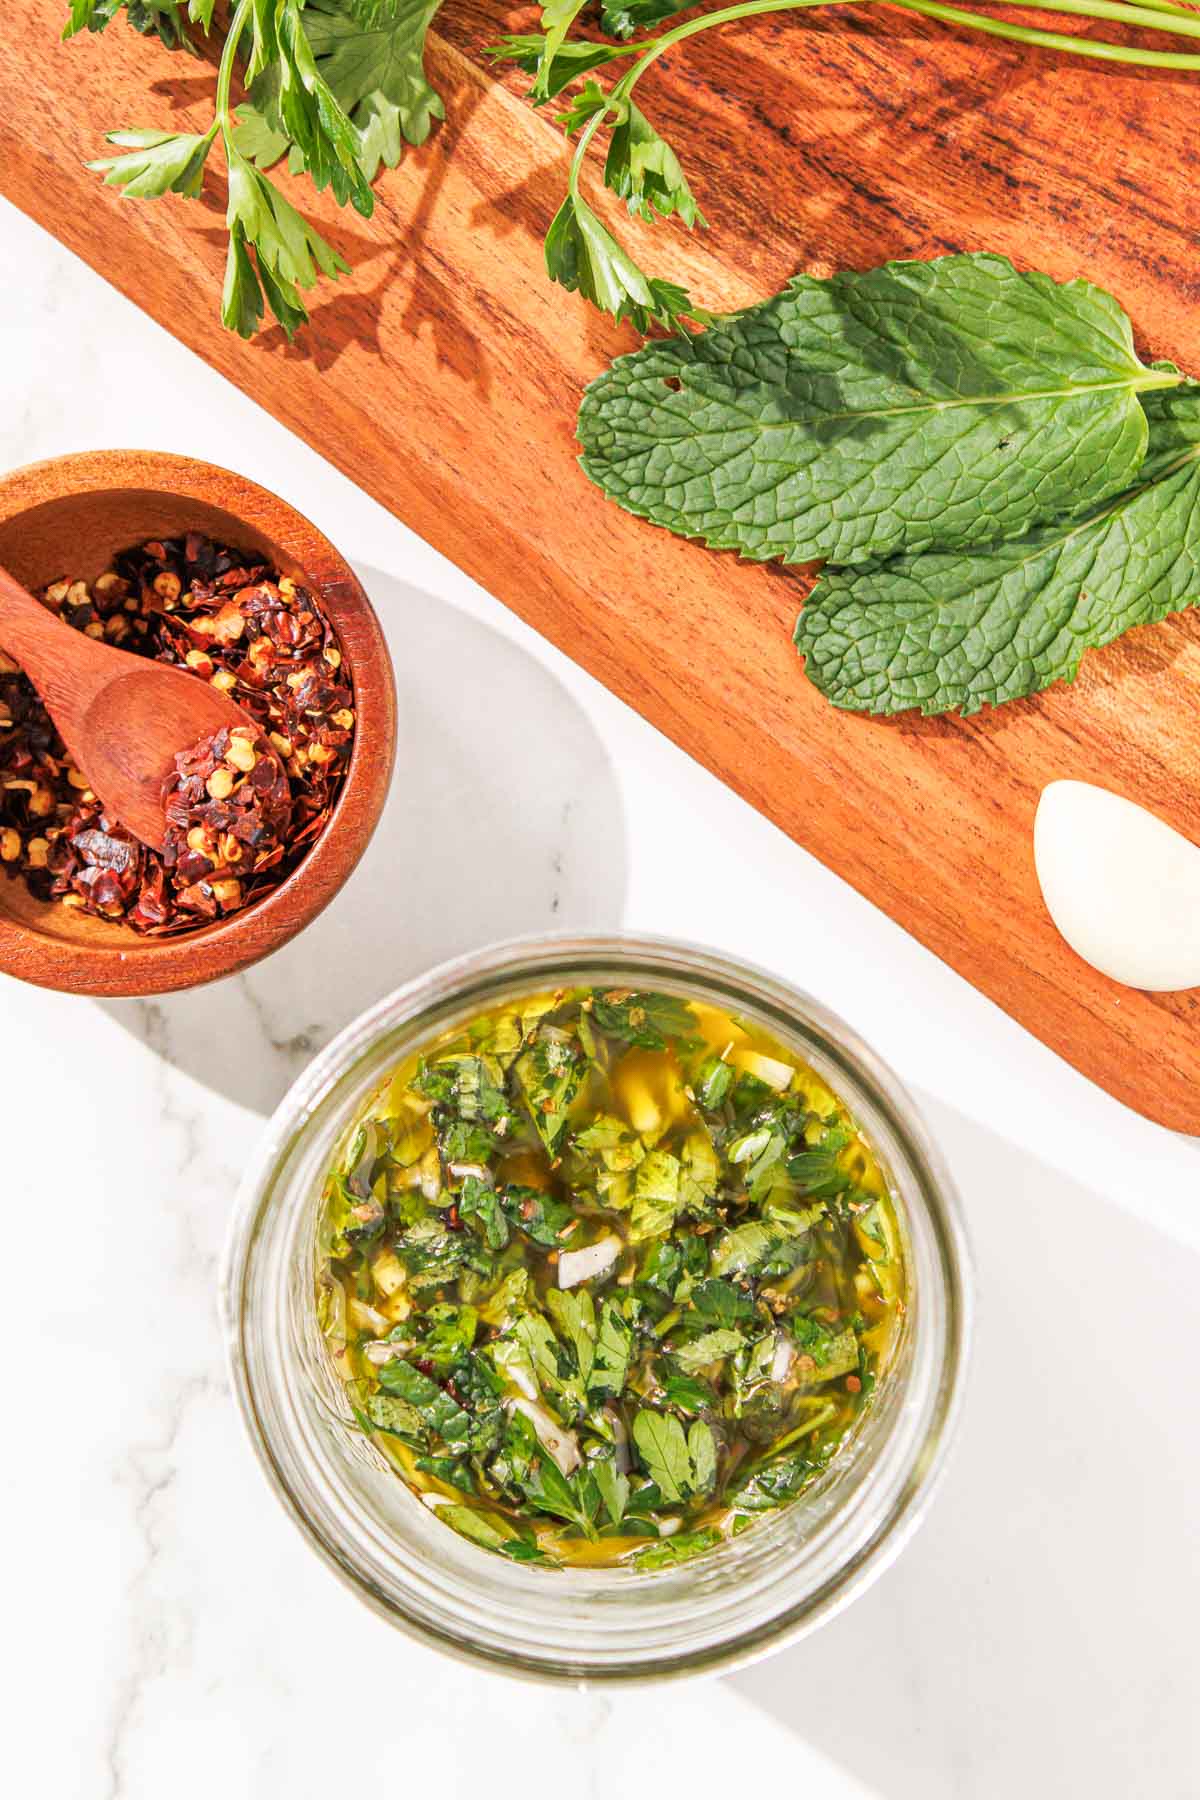 Overhead view of a homemade mint chimichurri in a glass jar, with spices in a wooden bowl and fresh herbs on a cutting board nearby.